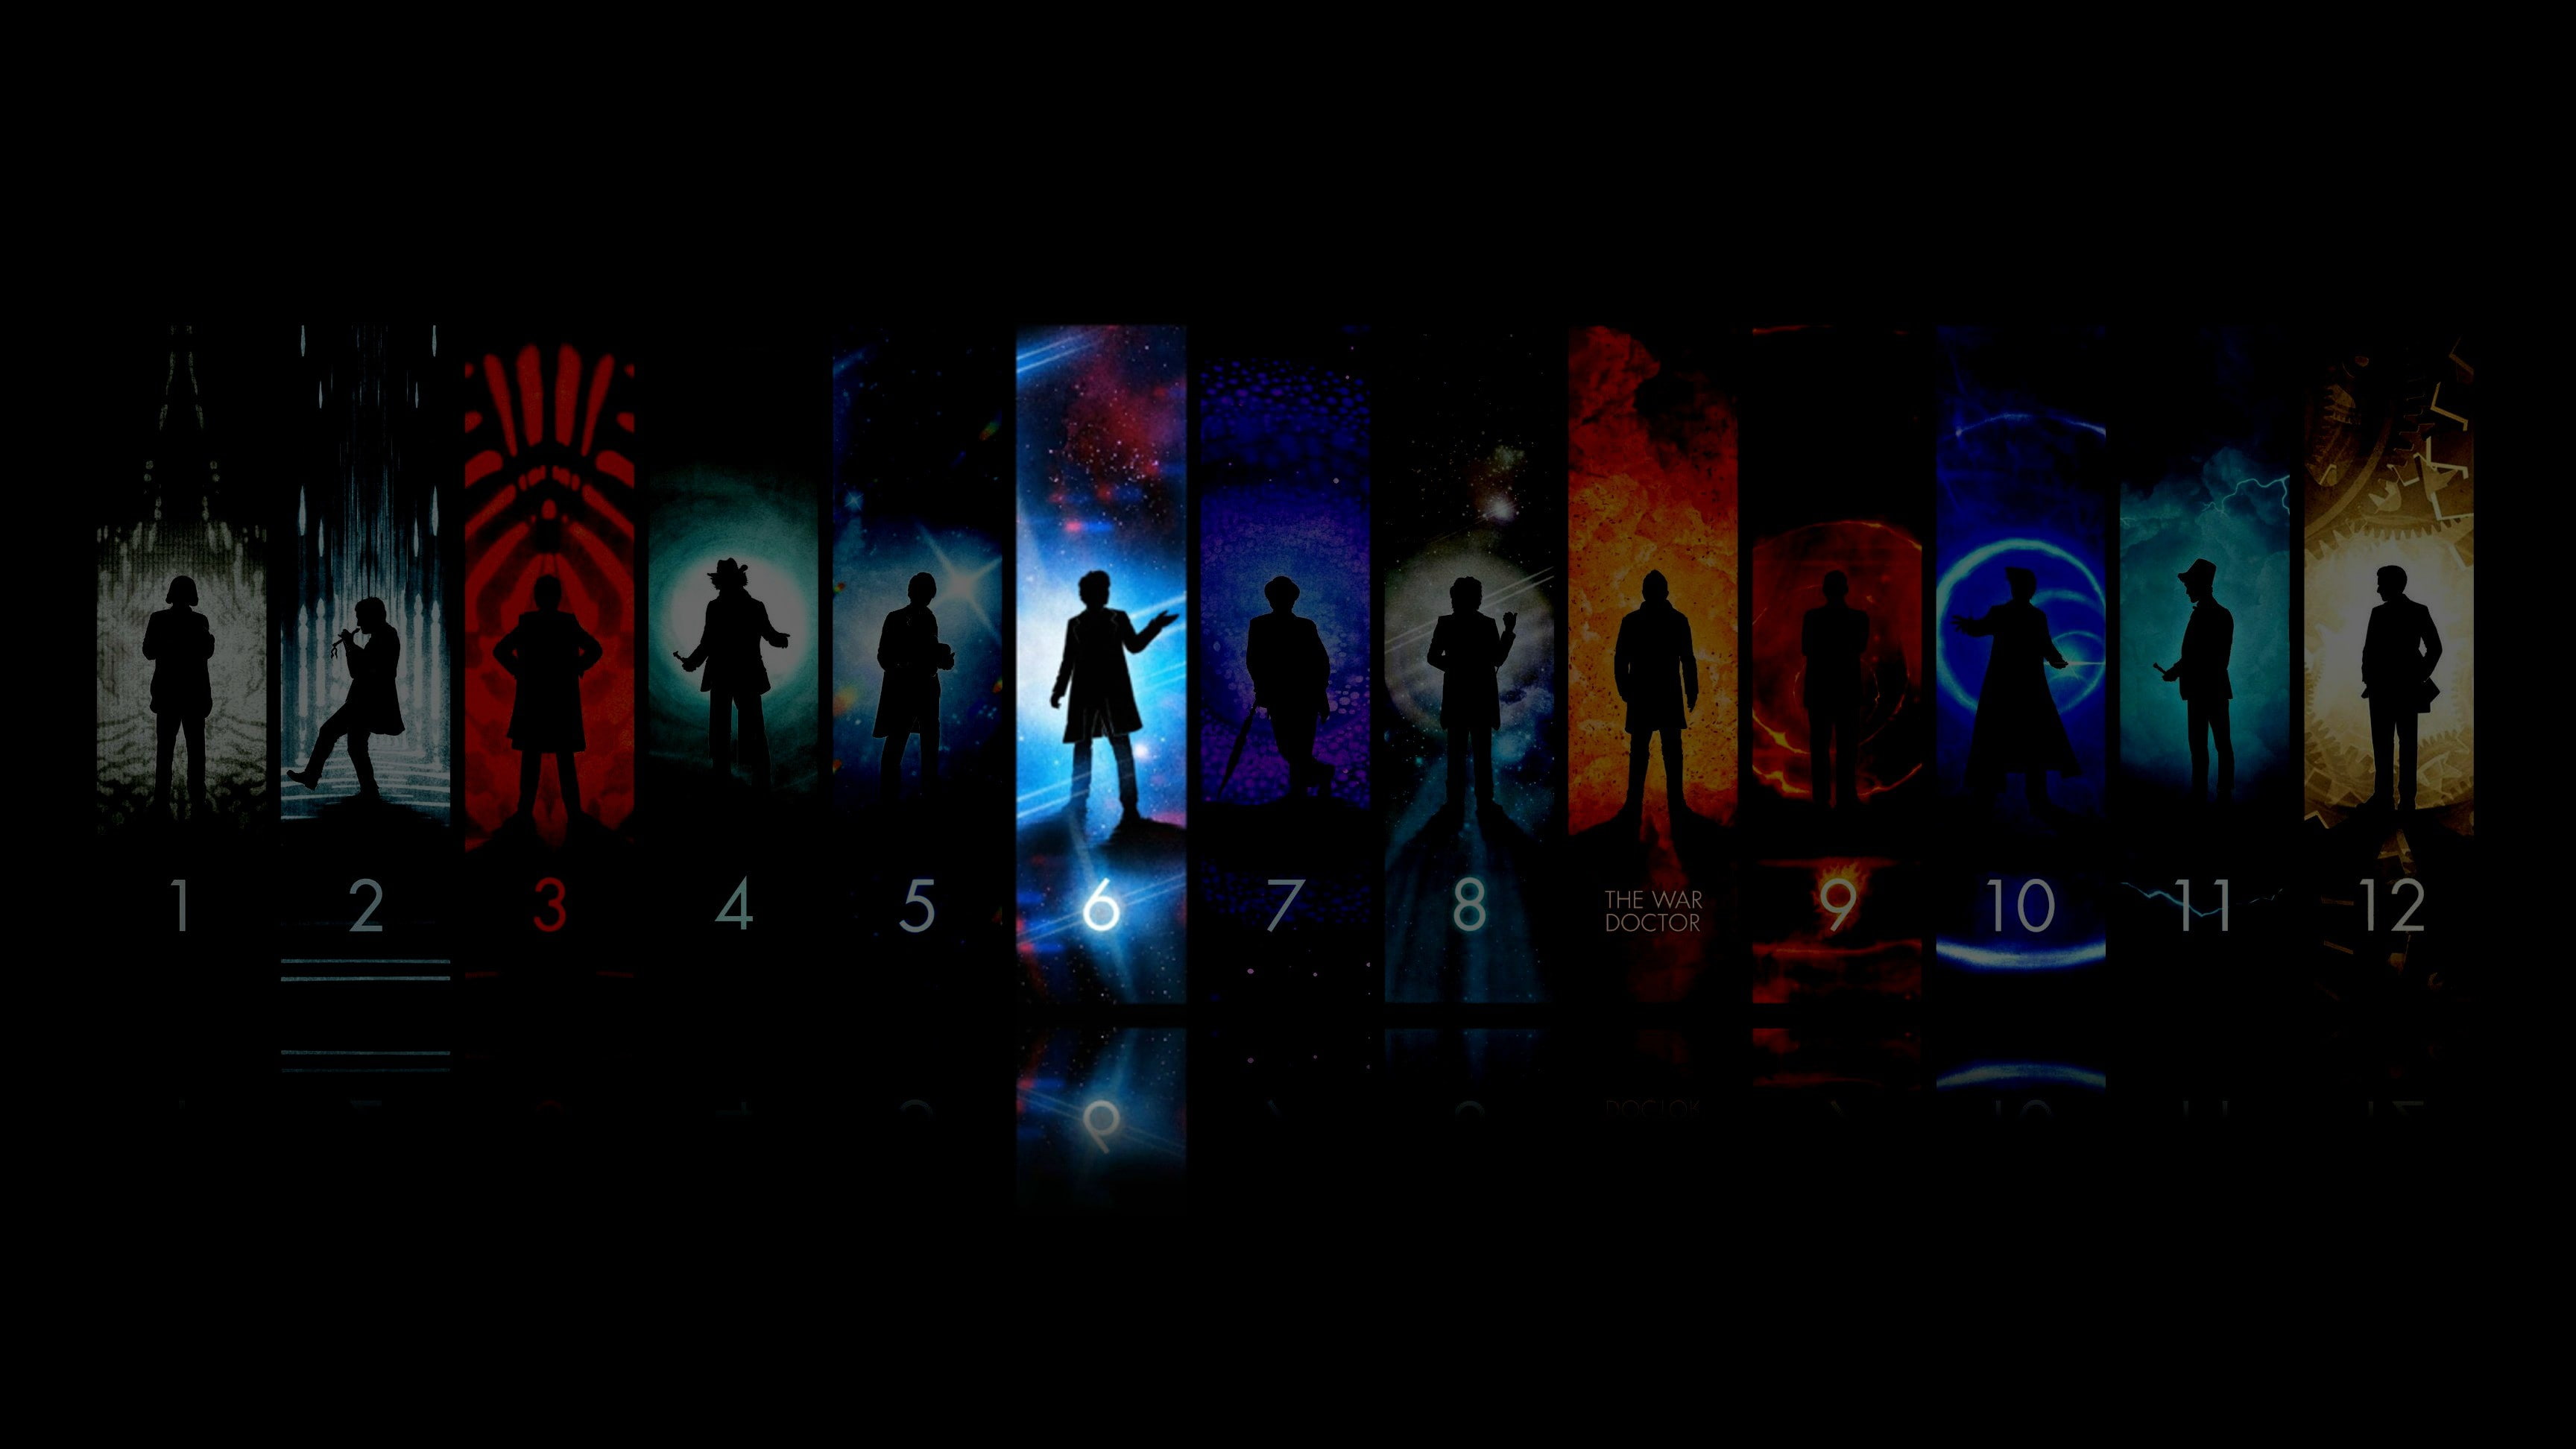 Doctor Who, group of people, real people, illuminated, night